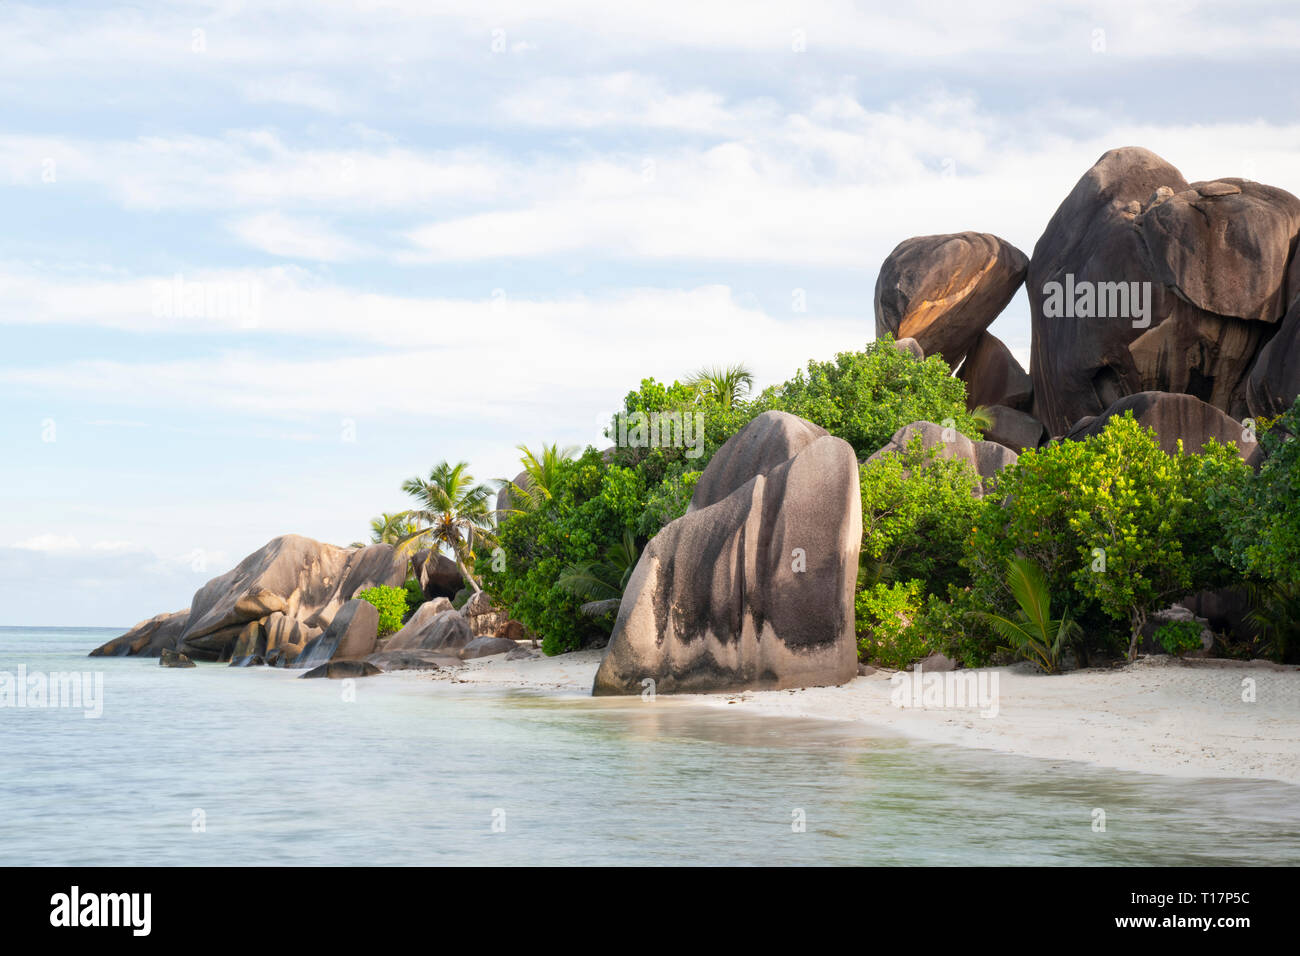 Large granite boulders and palm trees on L’Anse Source d’Argent, La Digue, the Seychelles Stock Photo